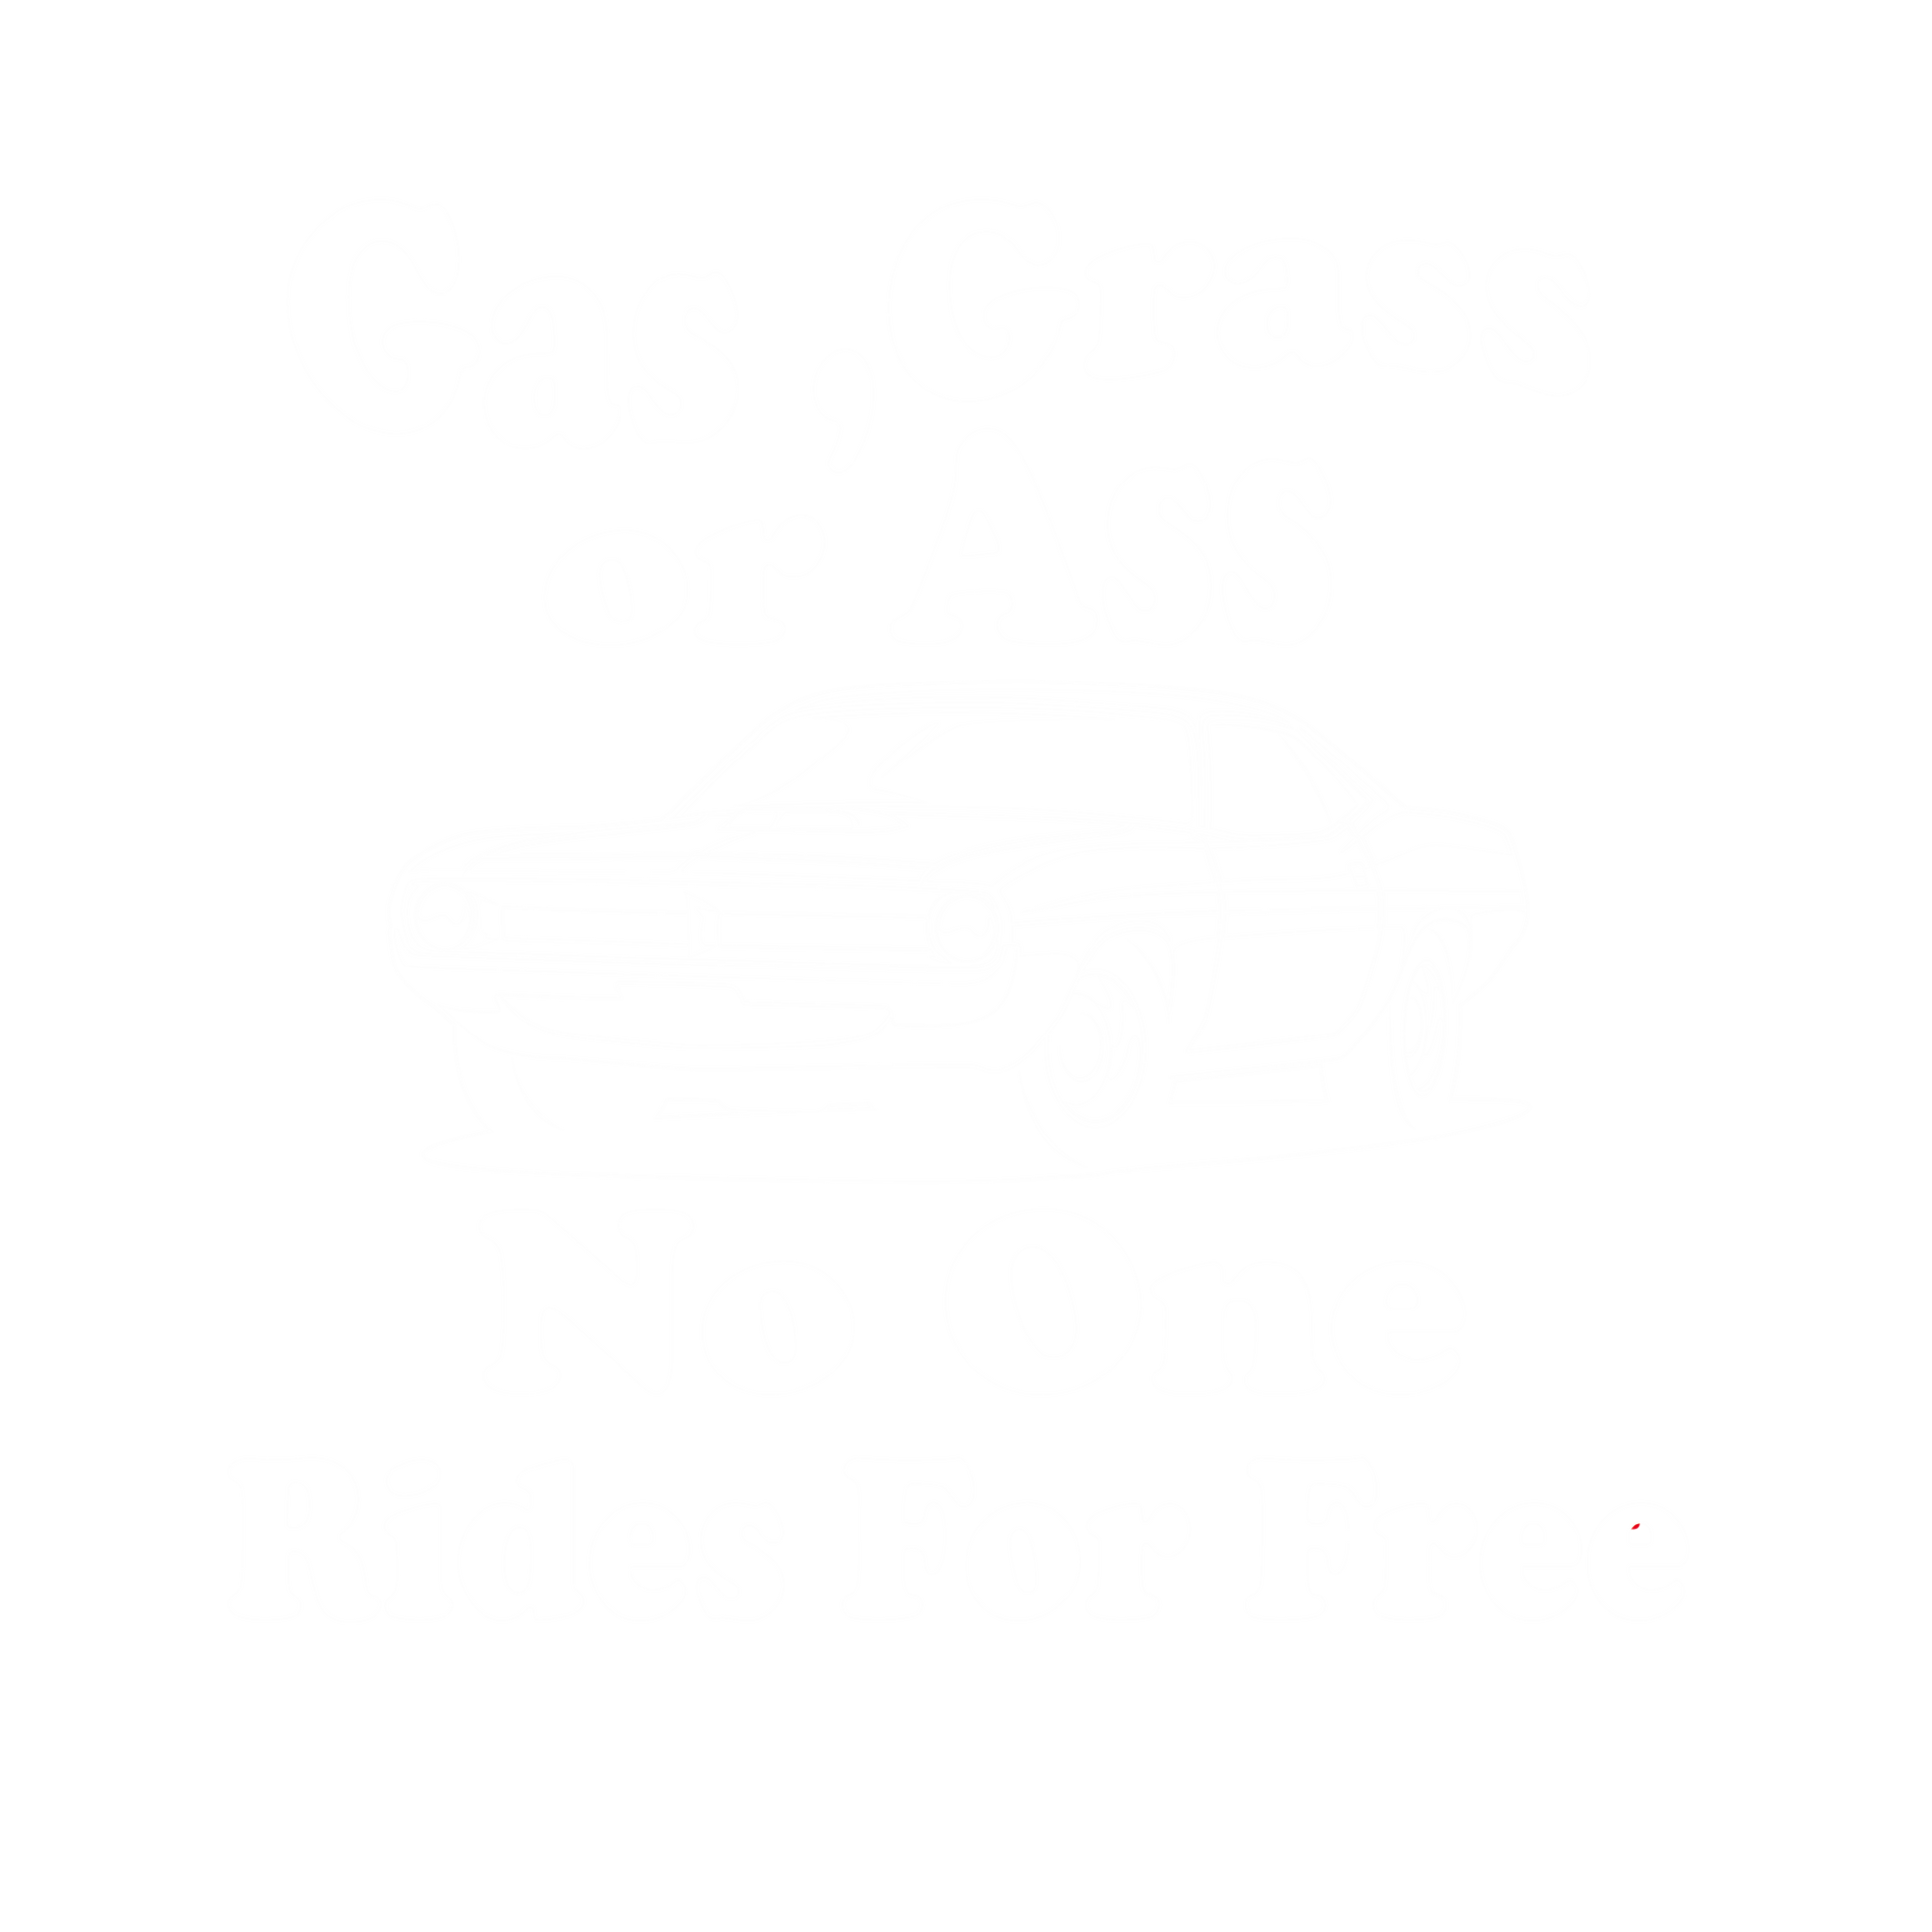 Gas,Grass or Ass No One Rides For Free